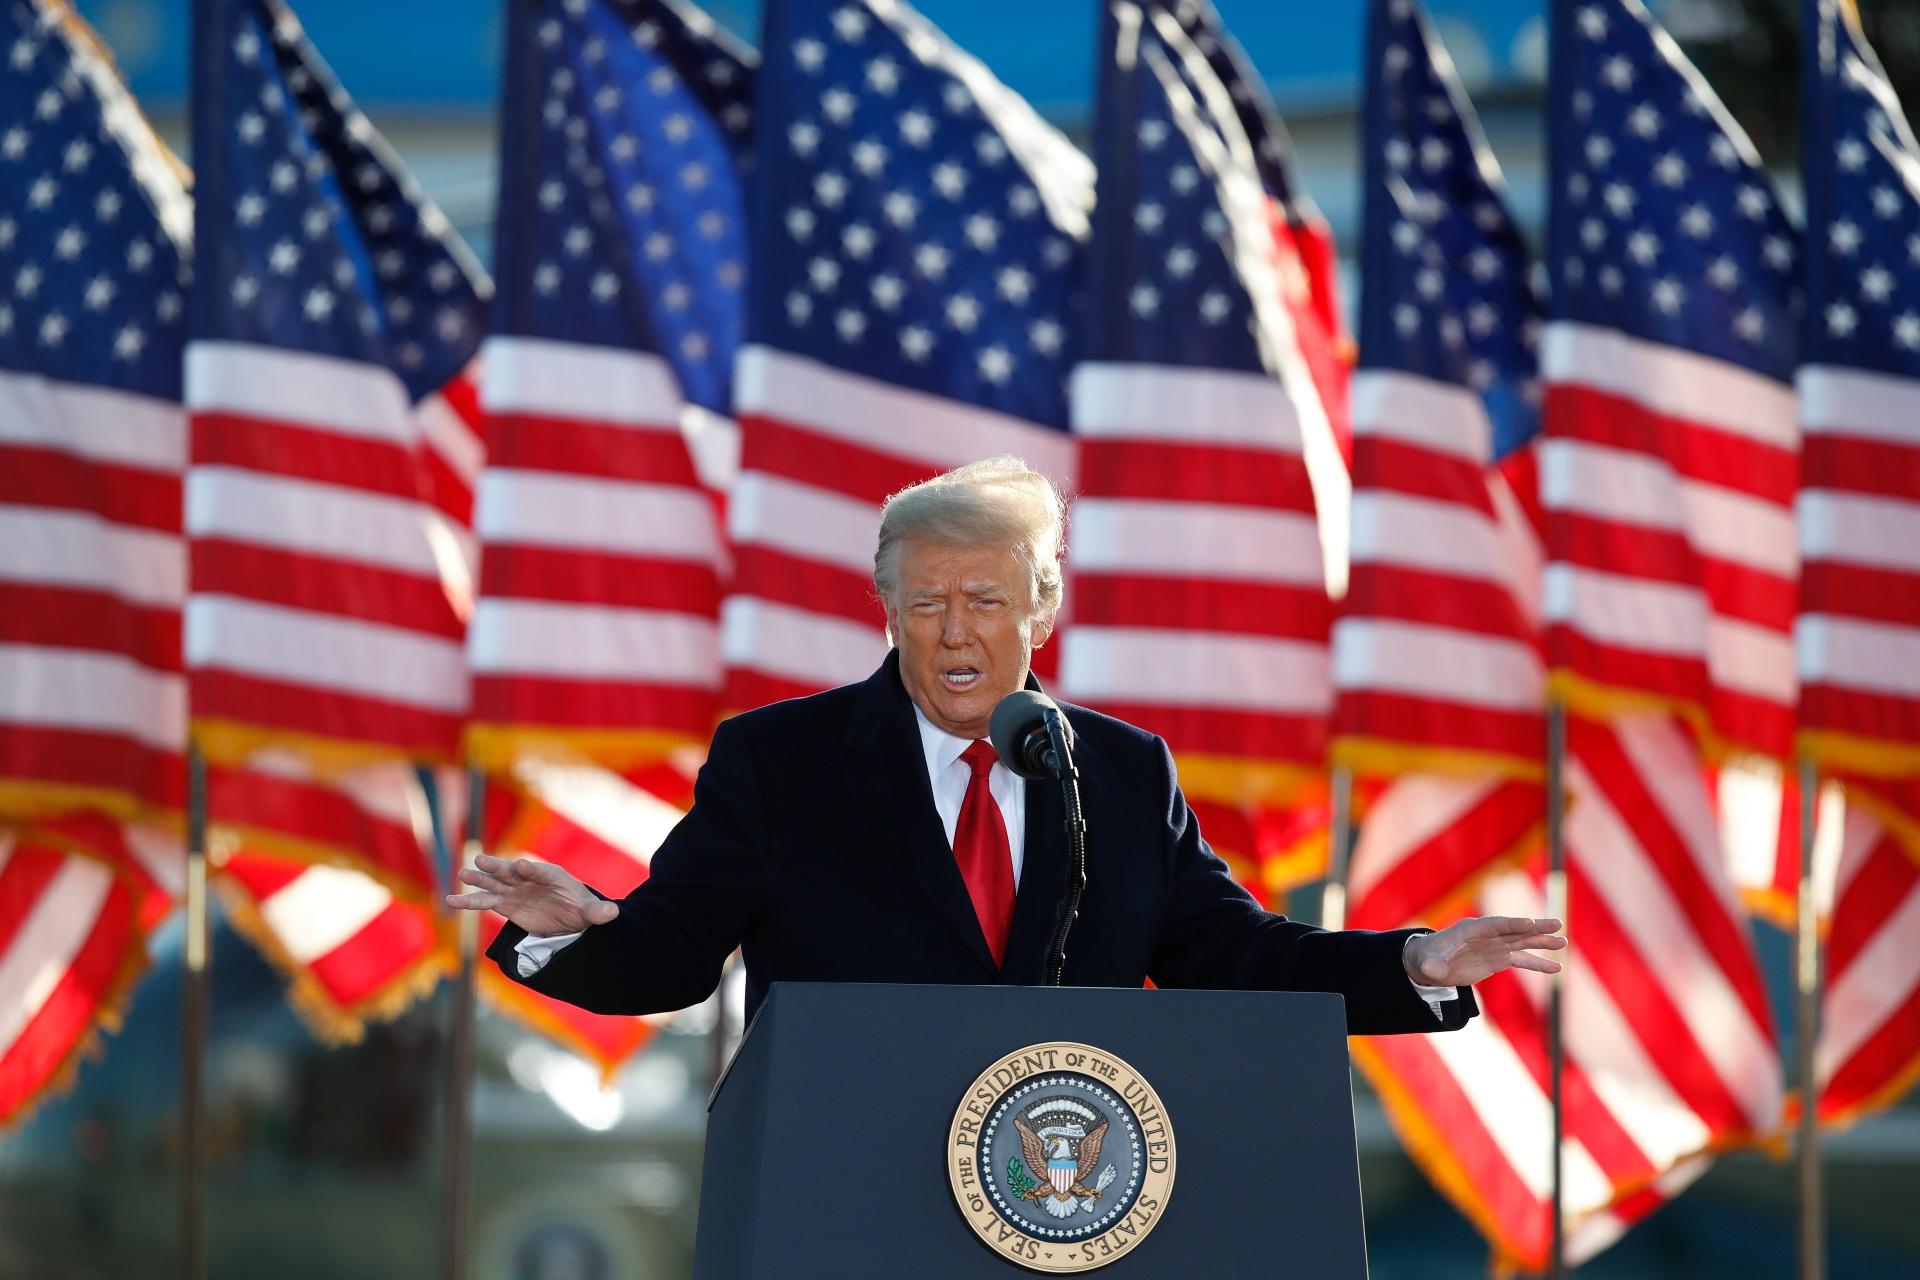 President Donald Trump speaks to crowd before boarding Air Force One at Andrews Air Force Base, Md., in this Wednesday, Jan. 20, 2021, file photo. (AP Photo / Luis M. Alvarez, File)